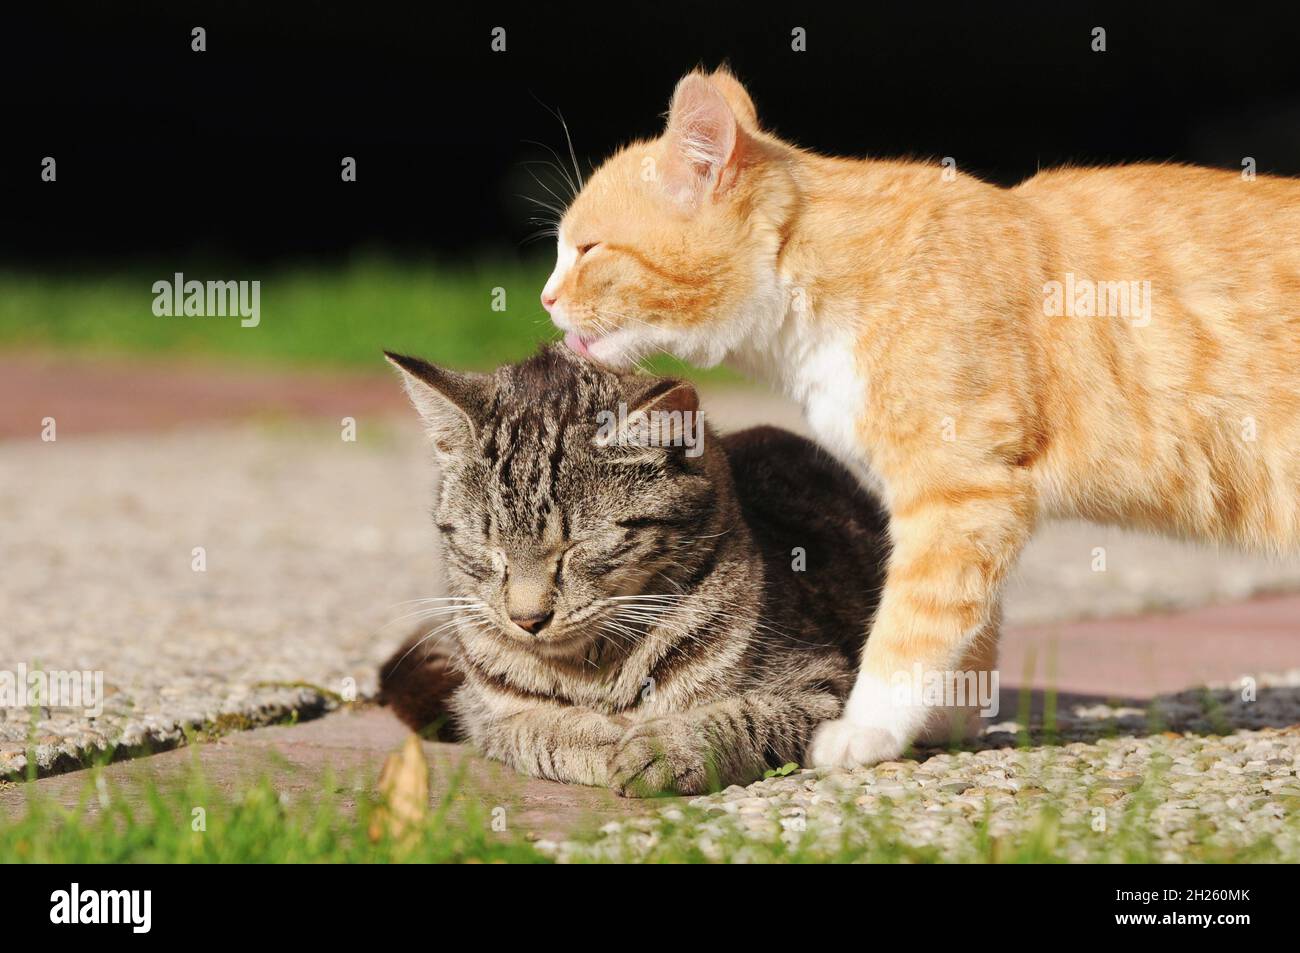 cat cleans the fur of another cat Stock Photo